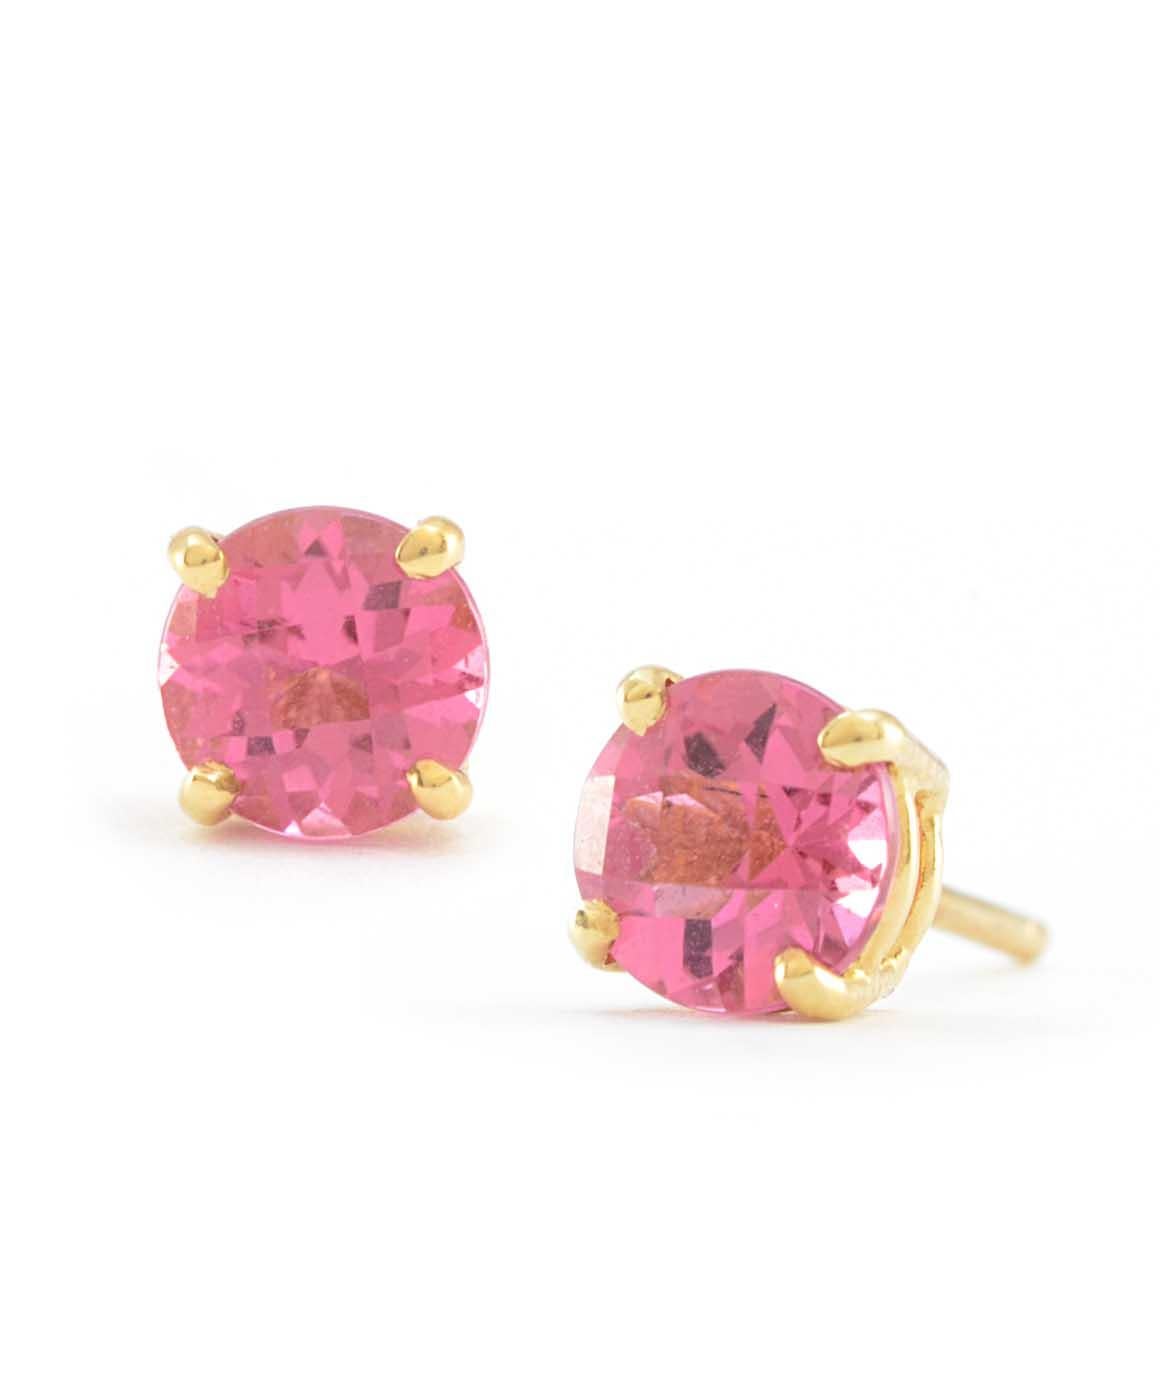 Solid 14K Yellow Gold Pink Tourmaline Stud Earrings, Excellent Condition! 

These beautiful pink tourmaline studs, weigh 1.0 grams, and measure about 0.50ct. 
They are about 5mm in diameter, with a butterfly clasp. Please see photos for details! 